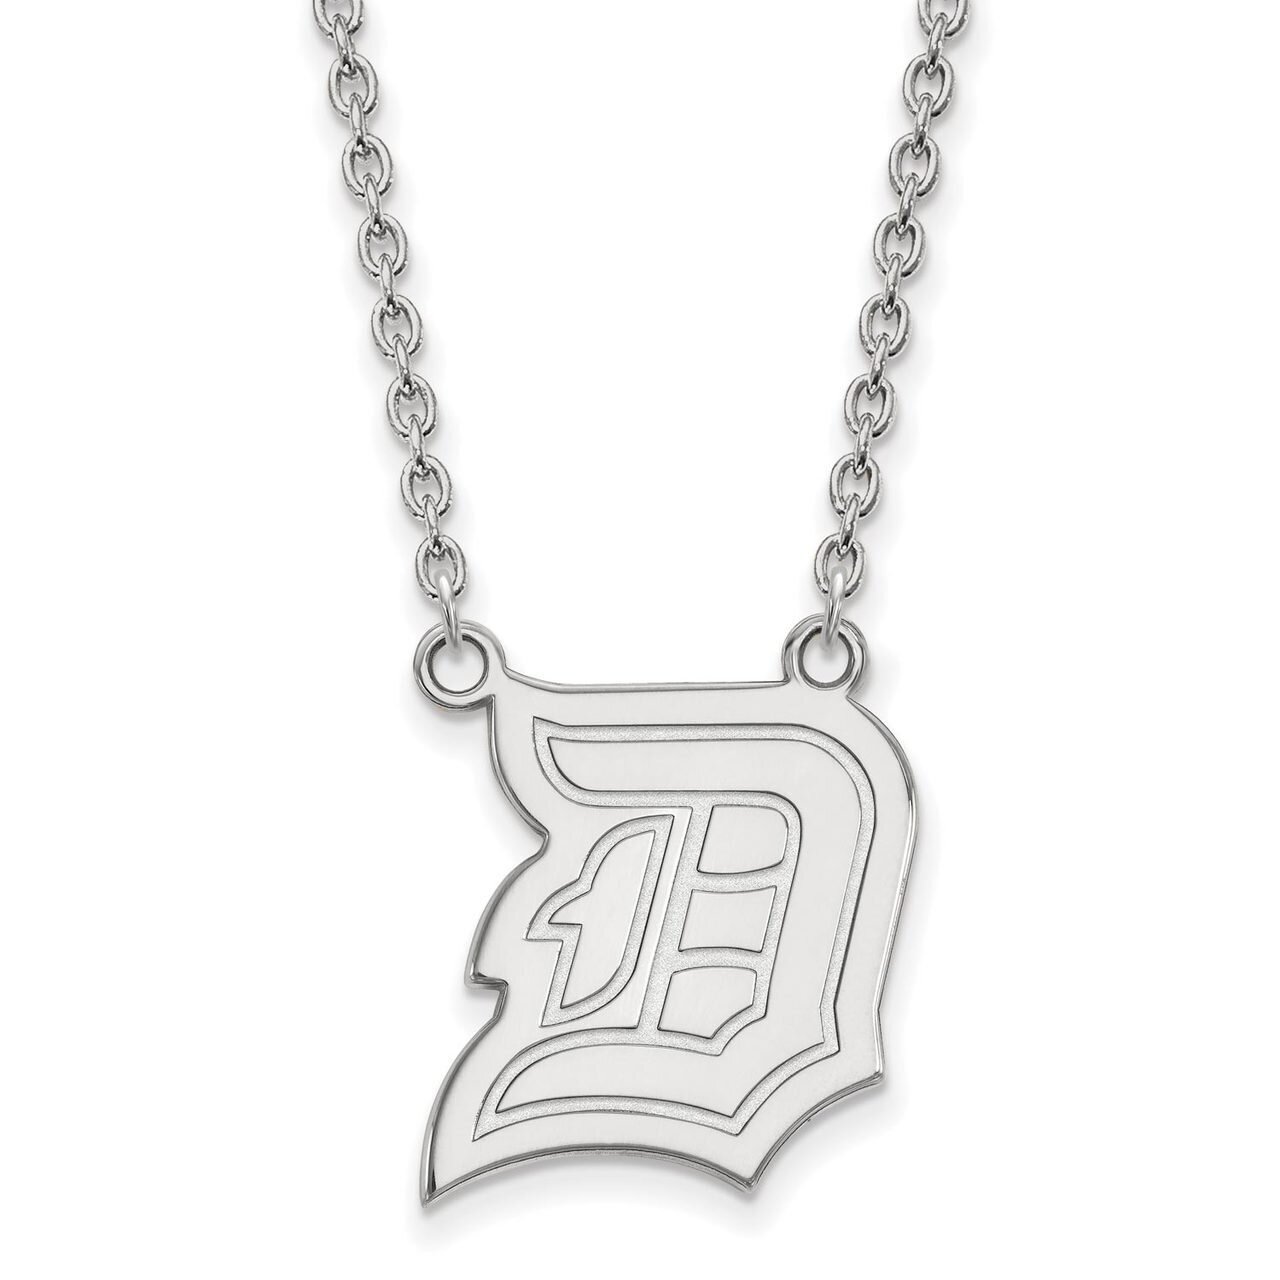 Duquesne University Large Pendant with Chain Necklace 14k White Gold 4W007DUU-18